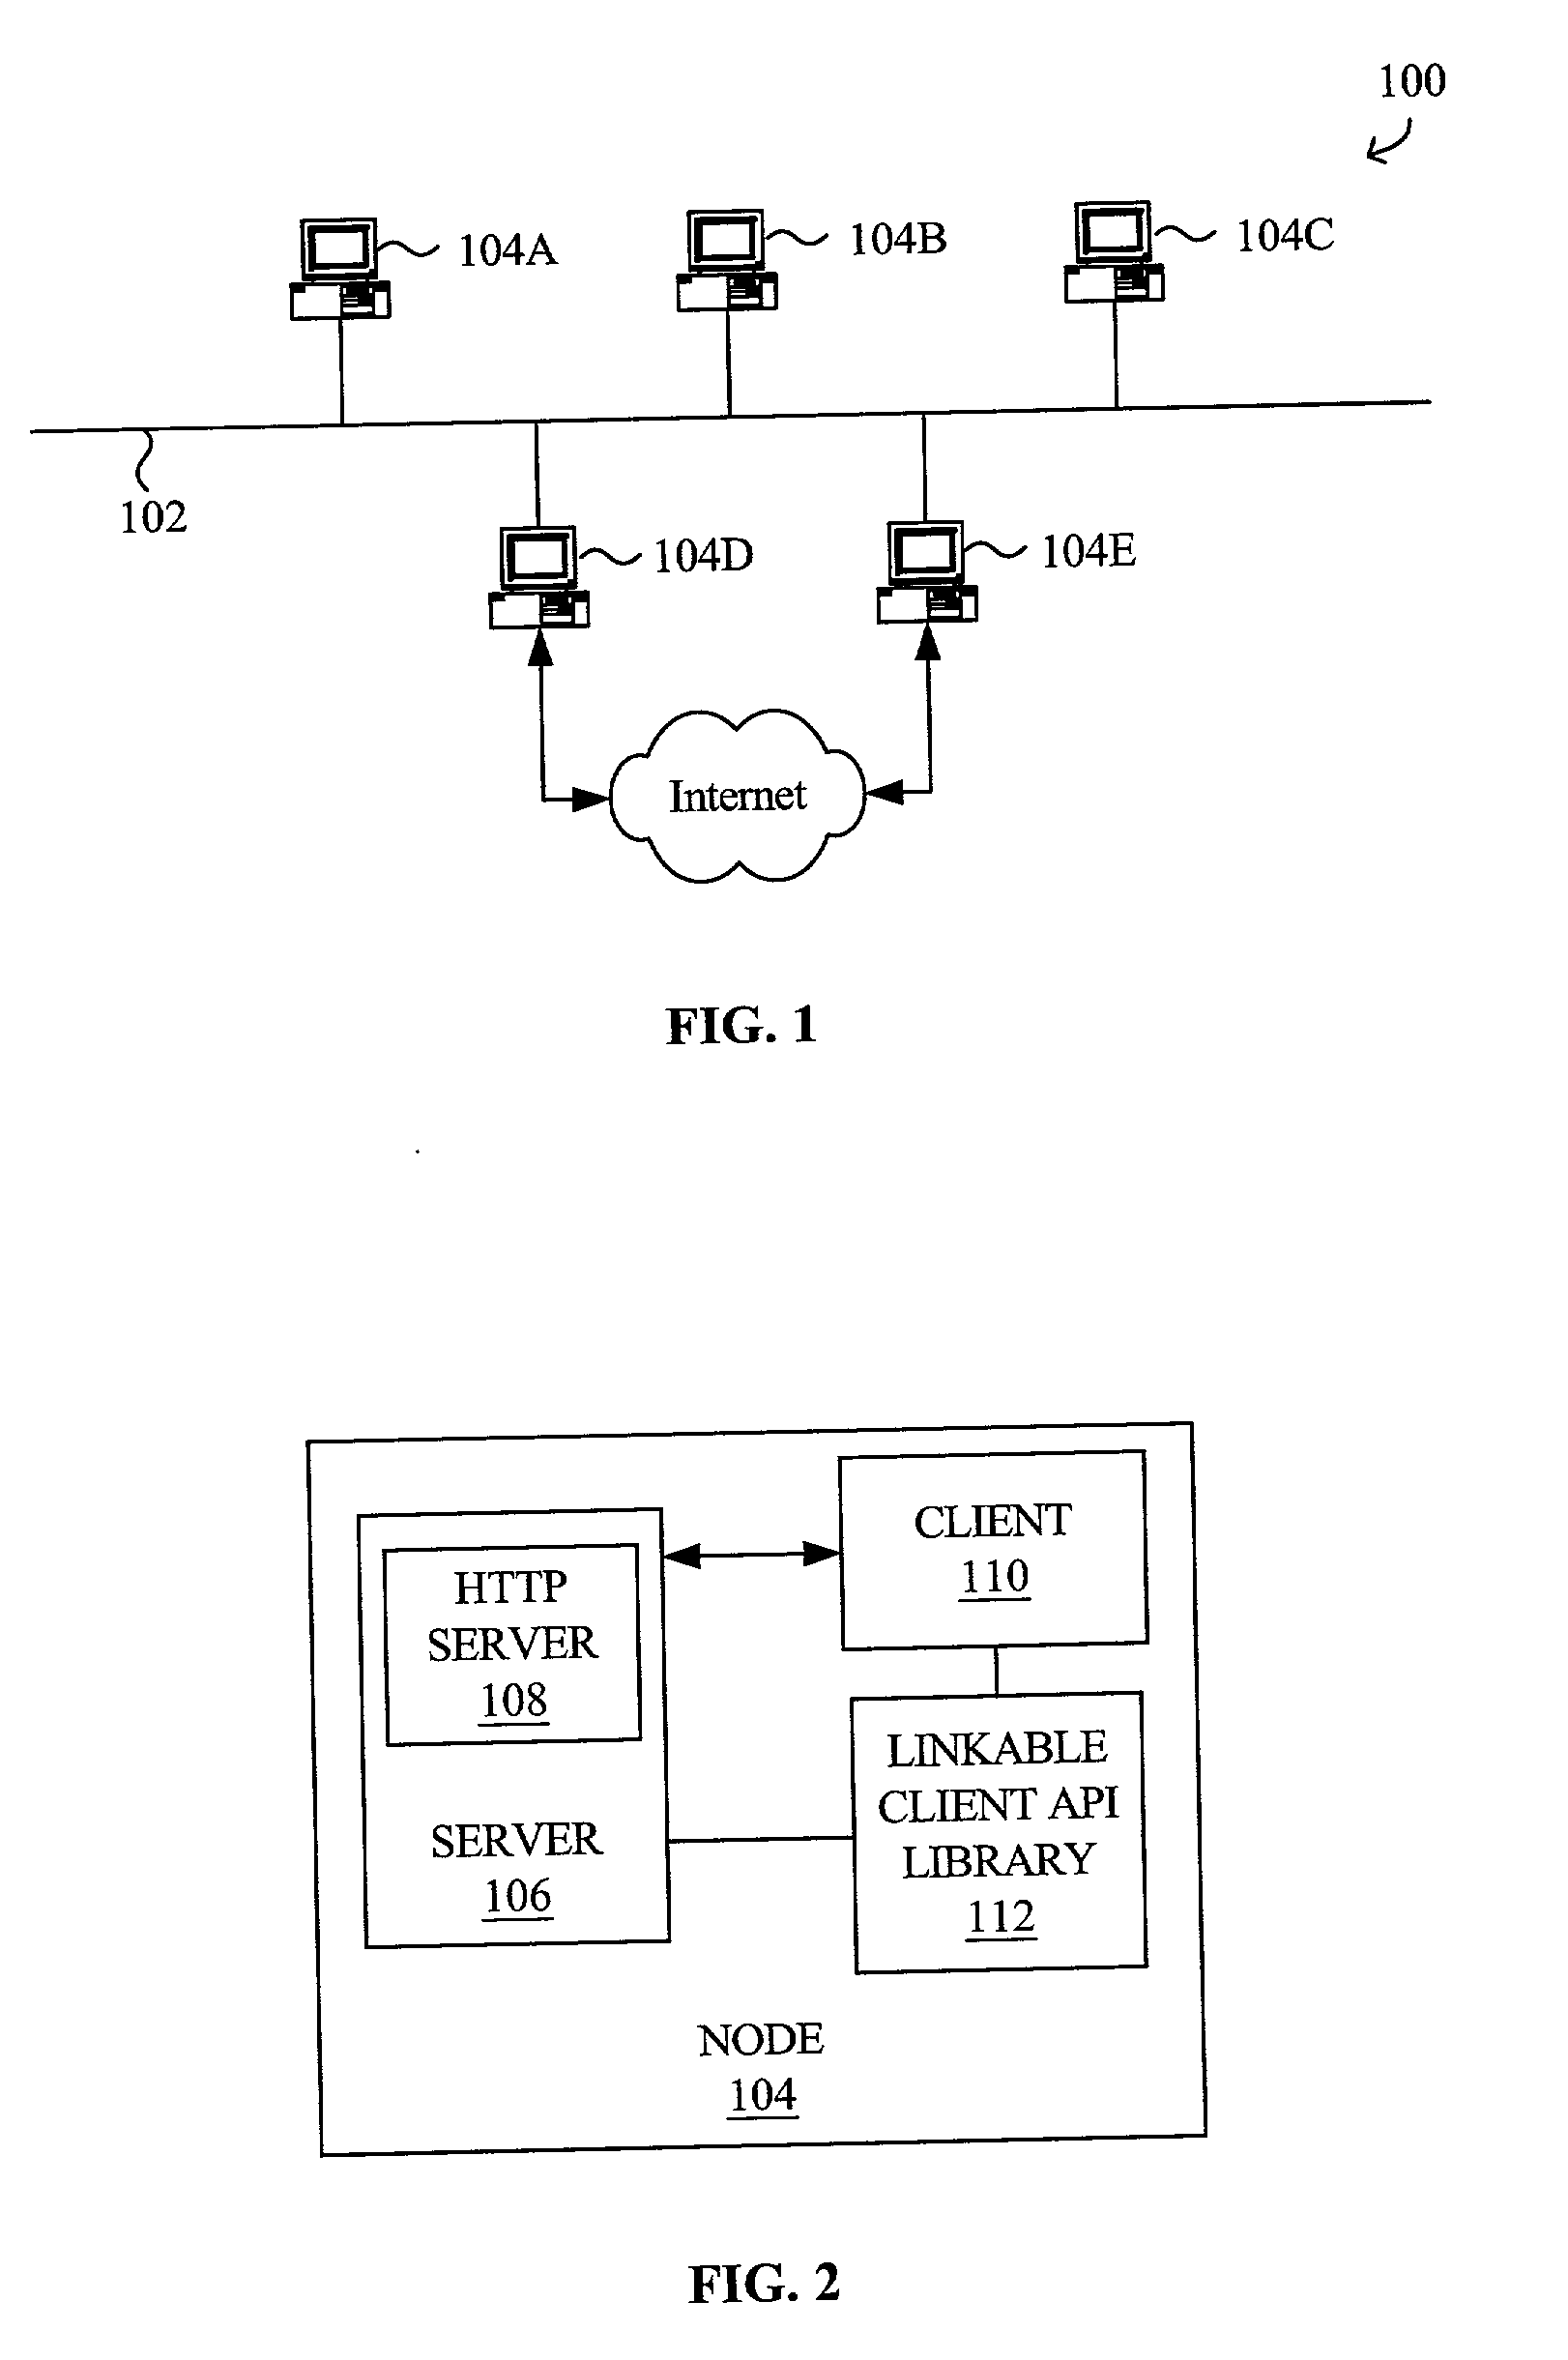 System and method to verify trusted status of peer in a peer-to-peer network environment